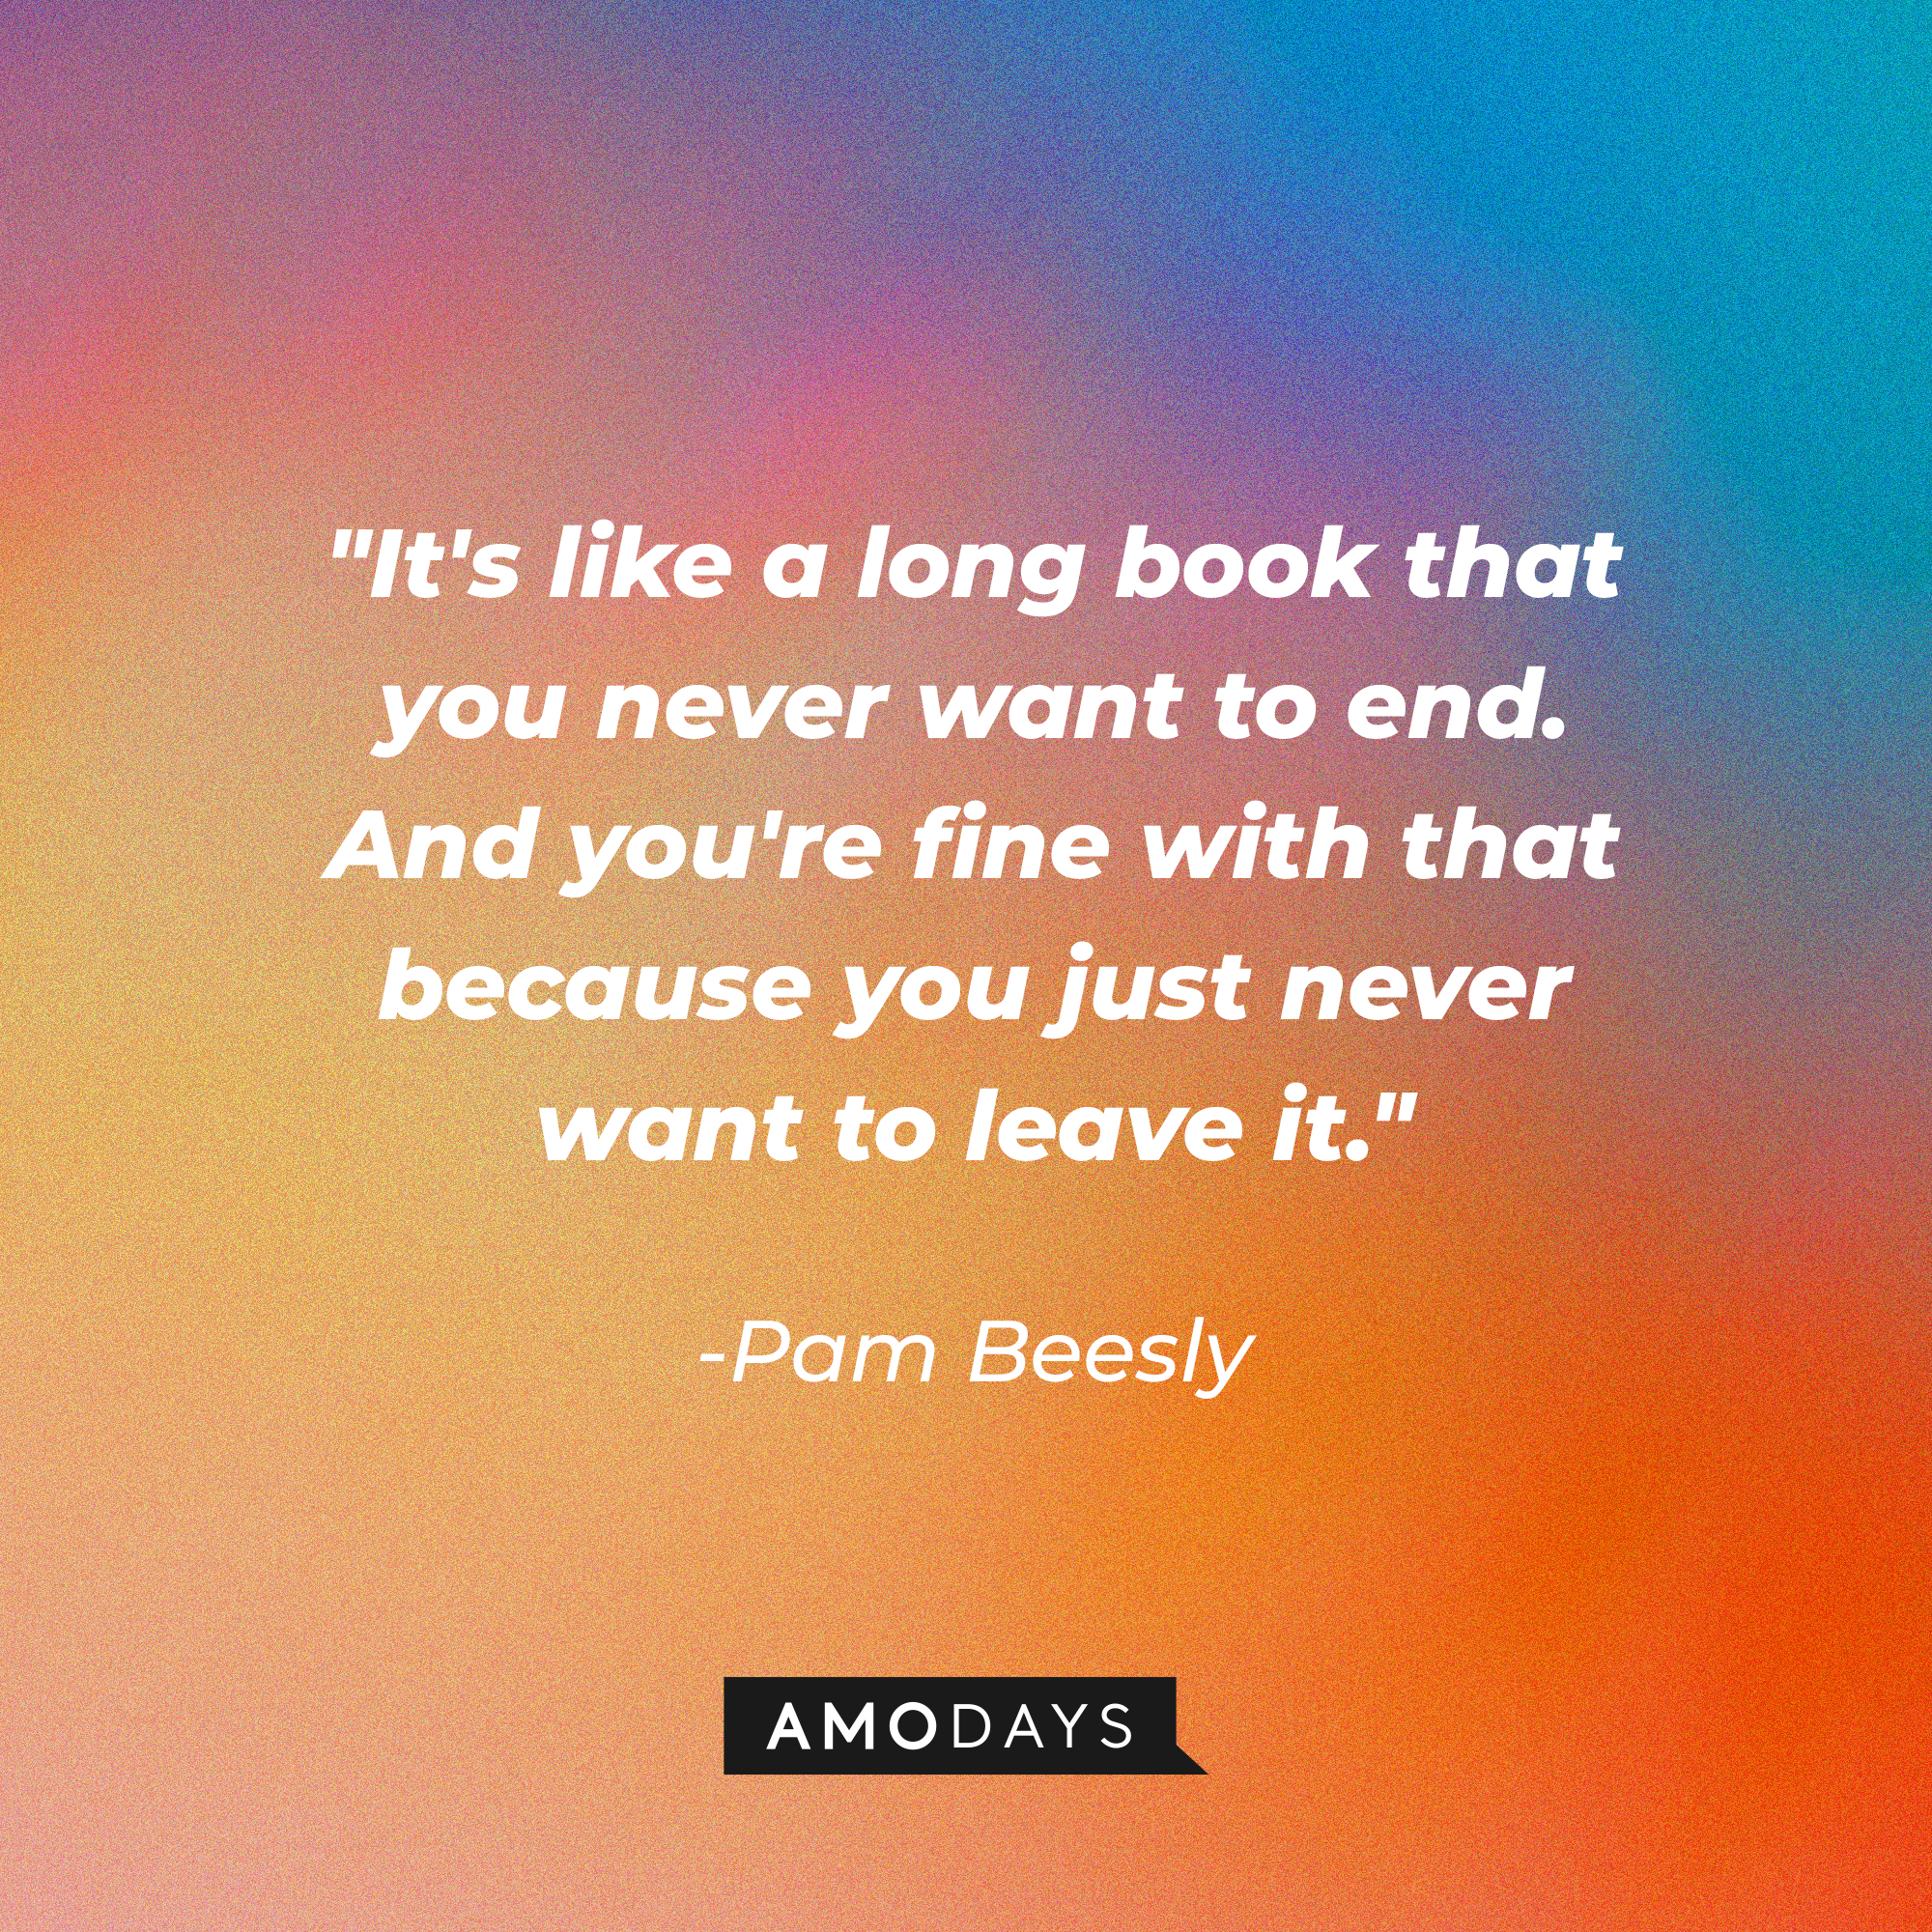 Pam Beesly’s quote: "It's like a long book that you never want to end. And you're fine with that because you just never want to leave it." | Image: AmoDays